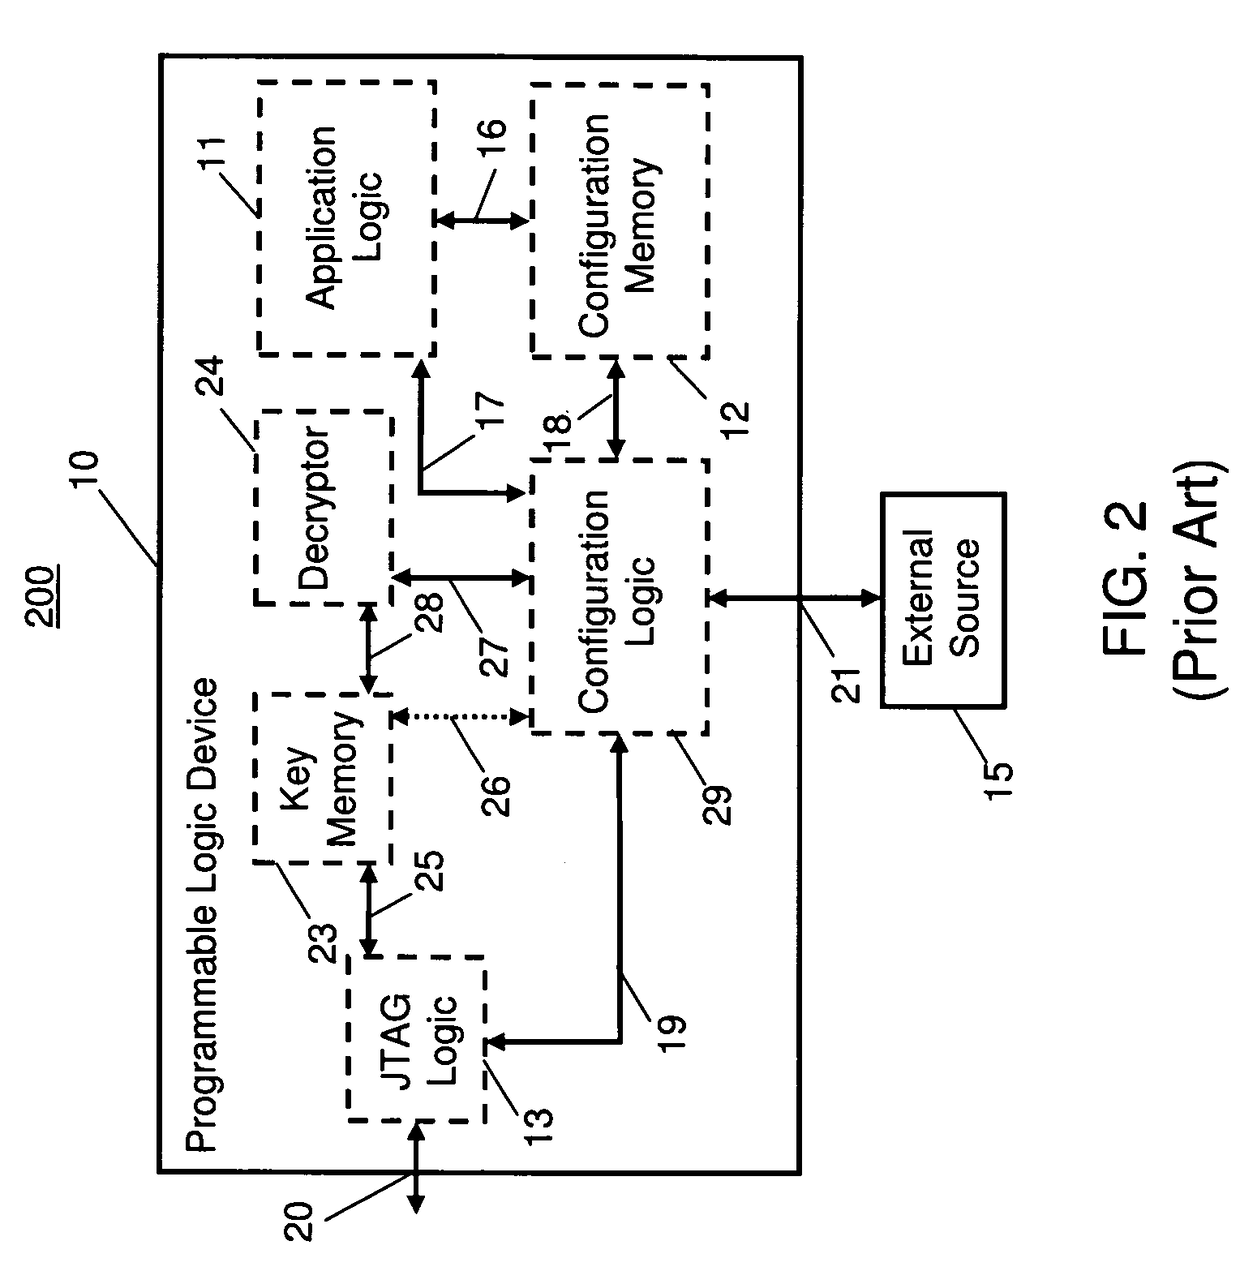 Programmable logic device having an embedded test logic with secure access control